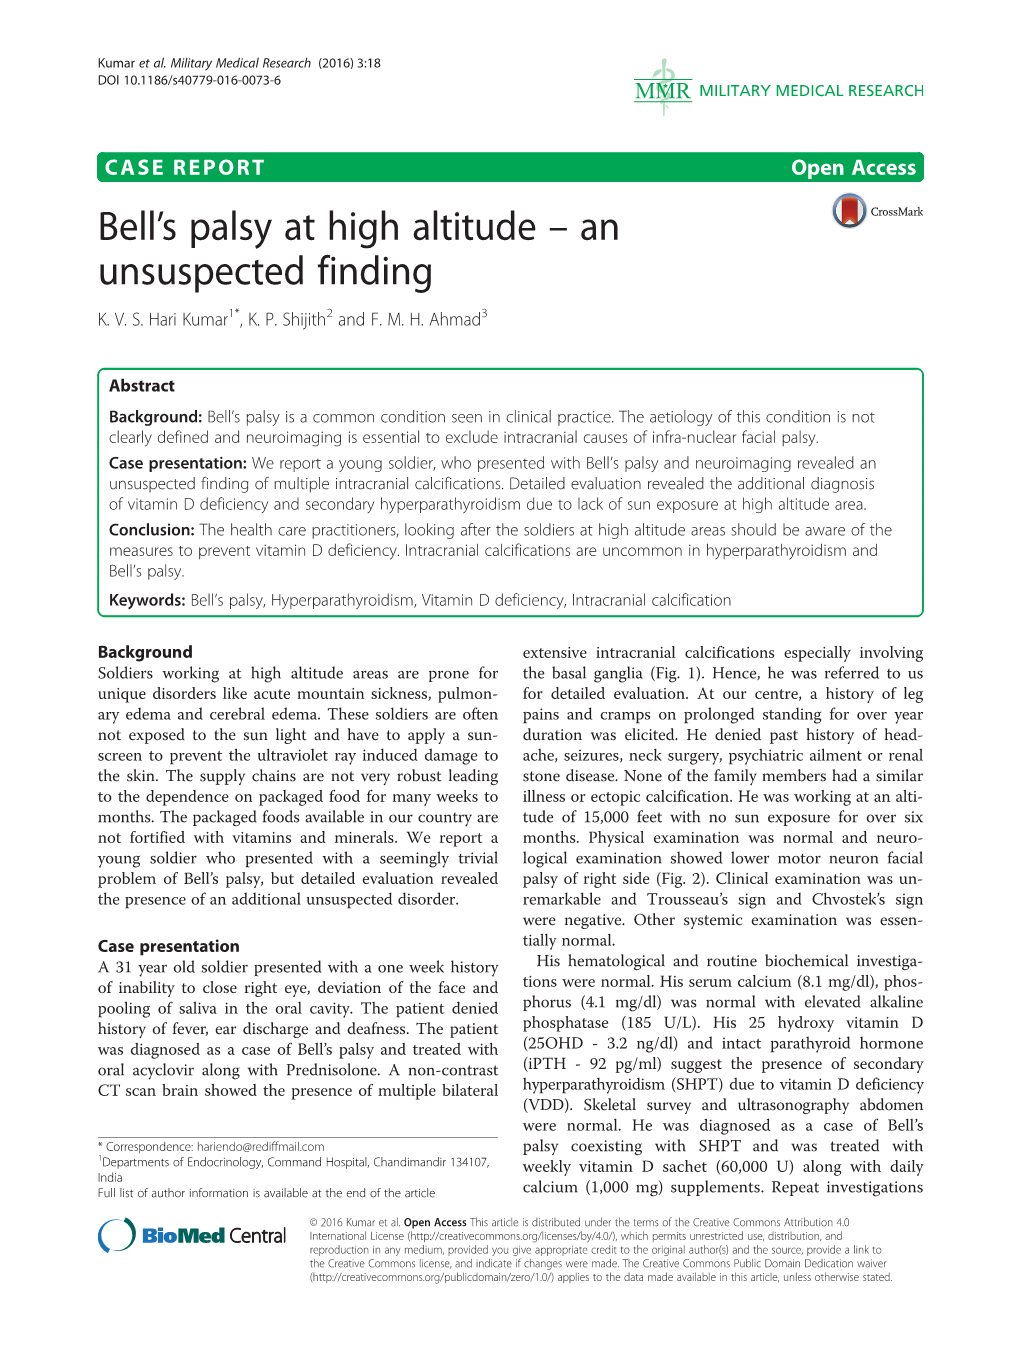 Bell's Palsy at High Altitude -- an Unsuspected Finding